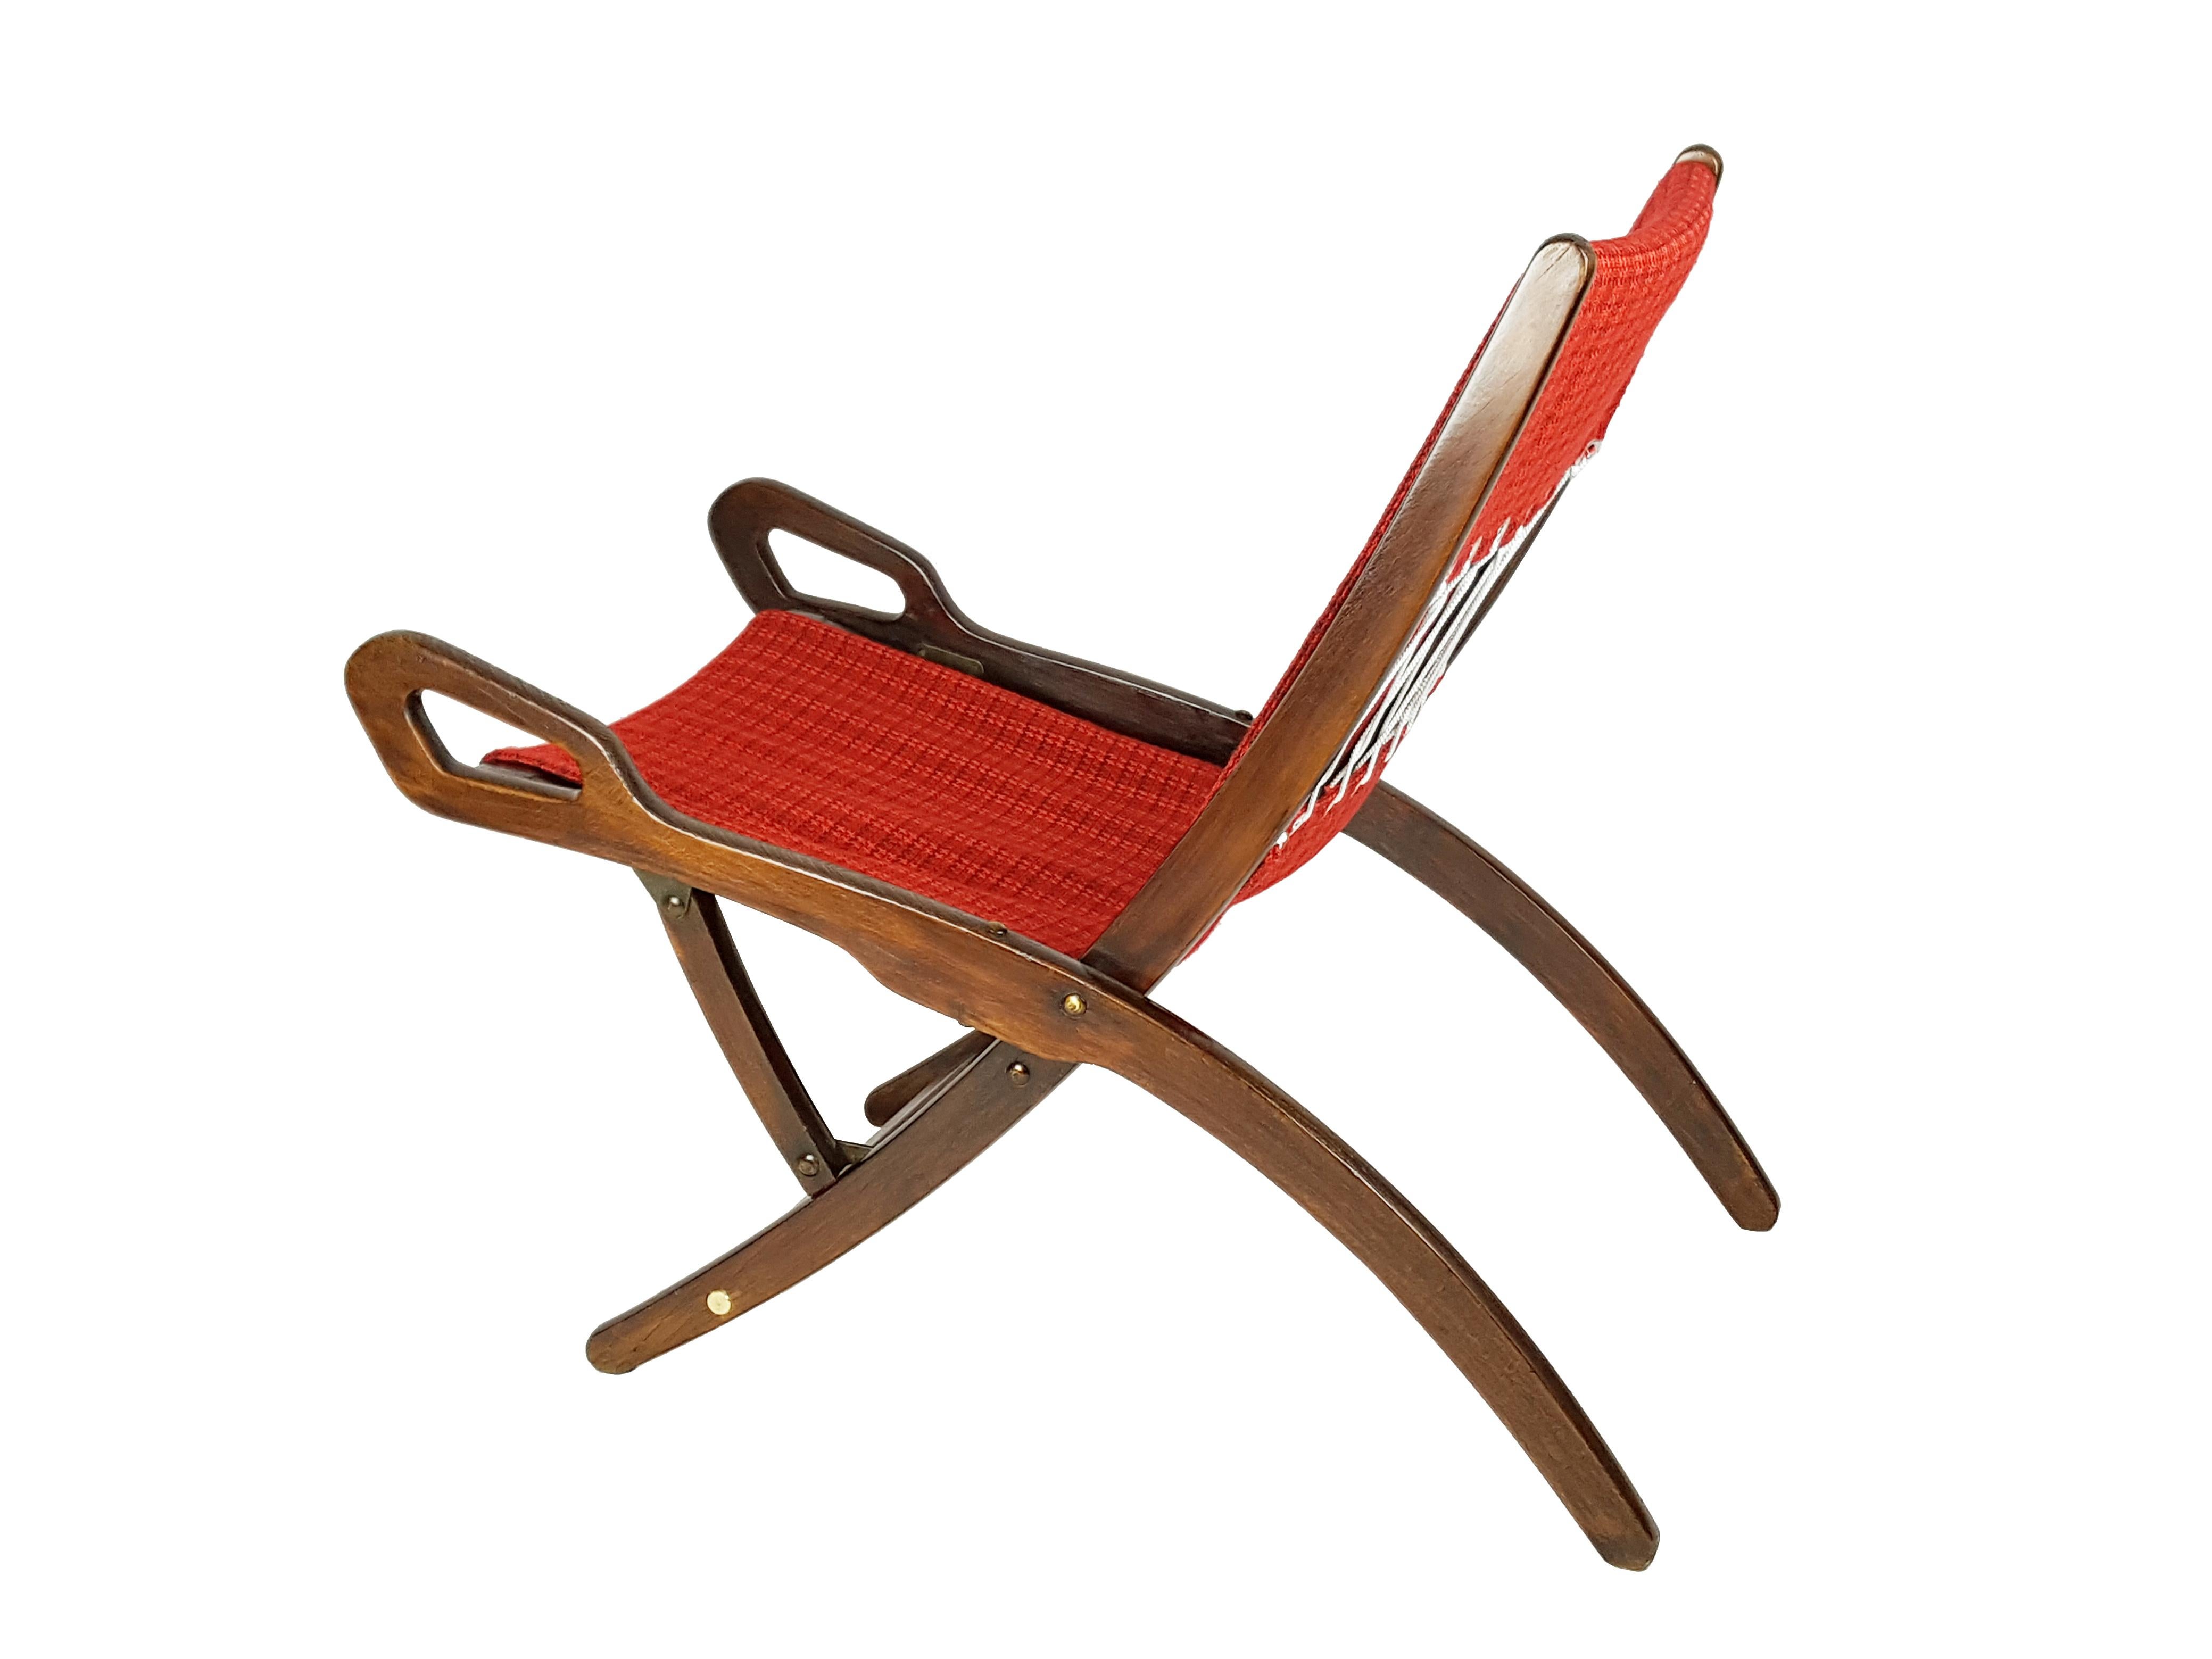 Folding chair in beech, brass and fabric.
The structure has been restored maintaining the original color. The seat and backrest have been completely redone with a reinforced thick weave fabric.